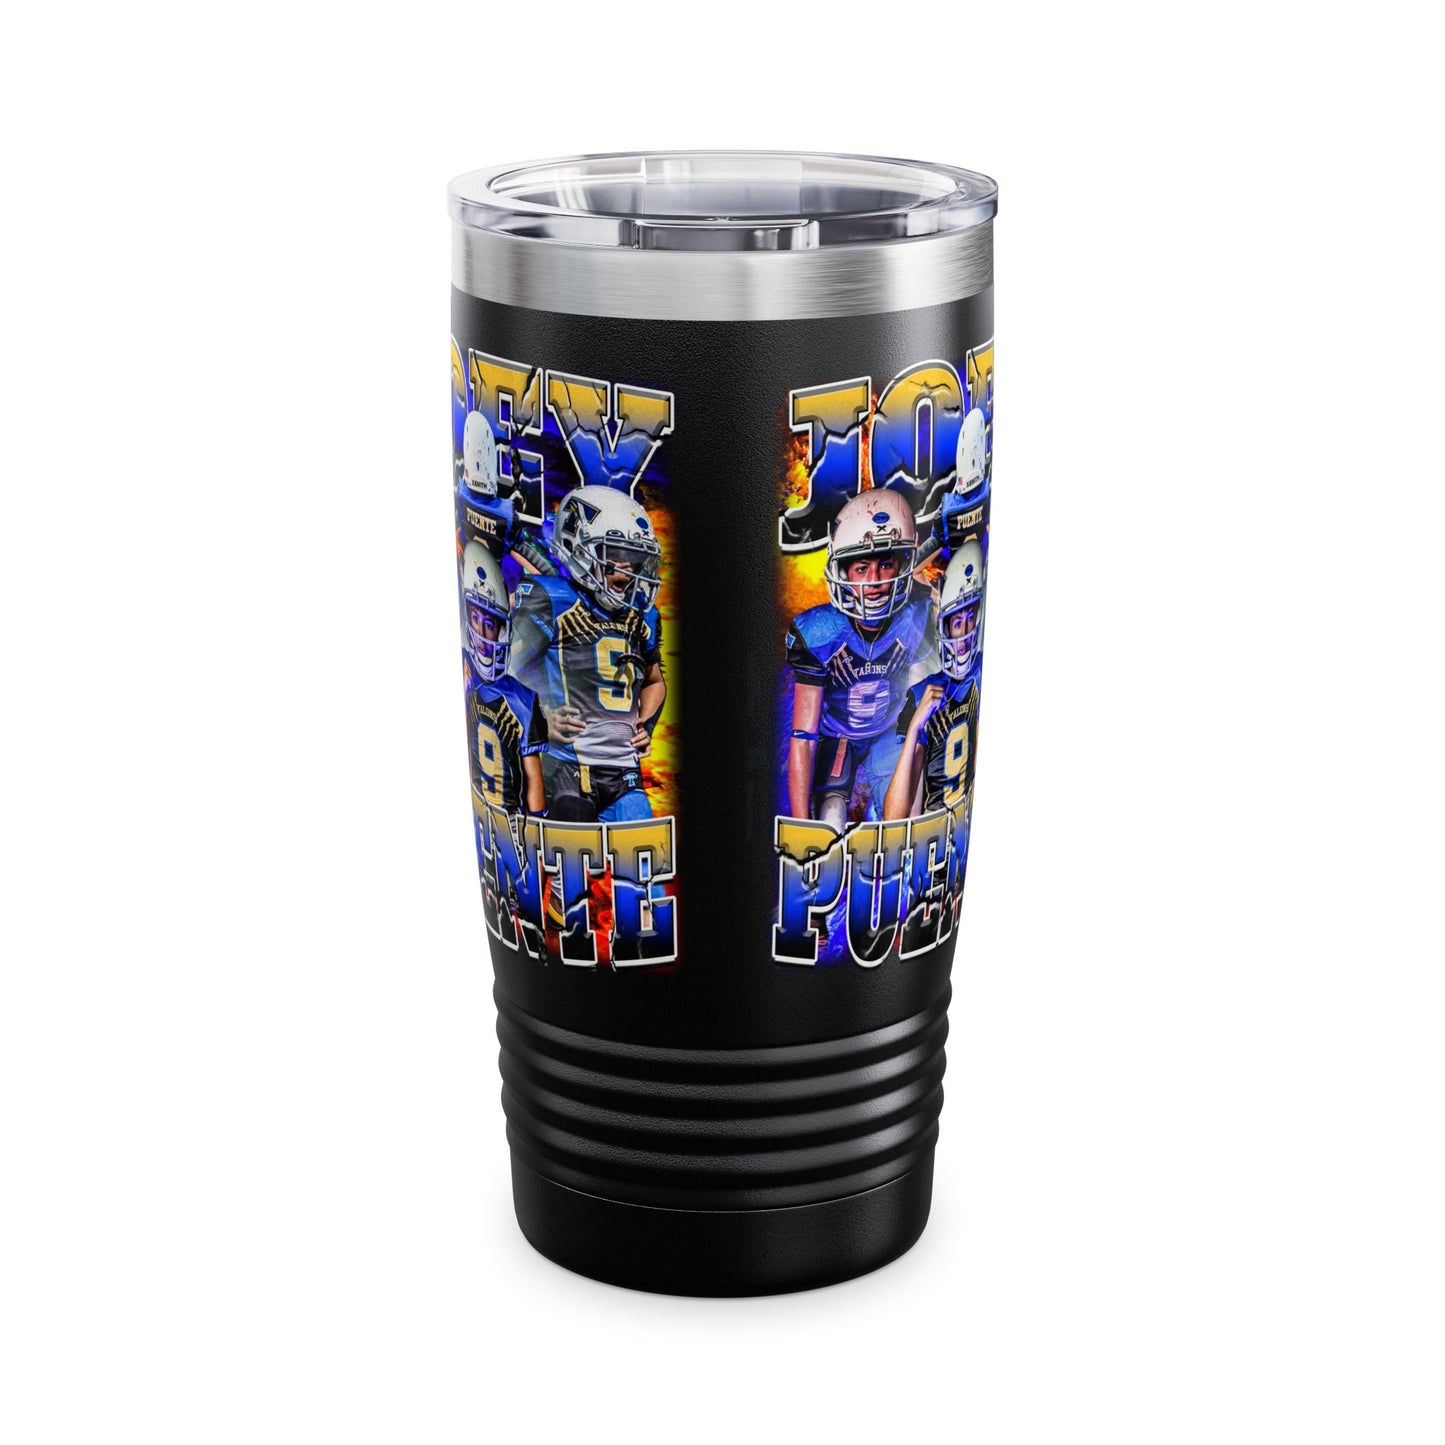 Joey Puente Stainless Steal Tumbler